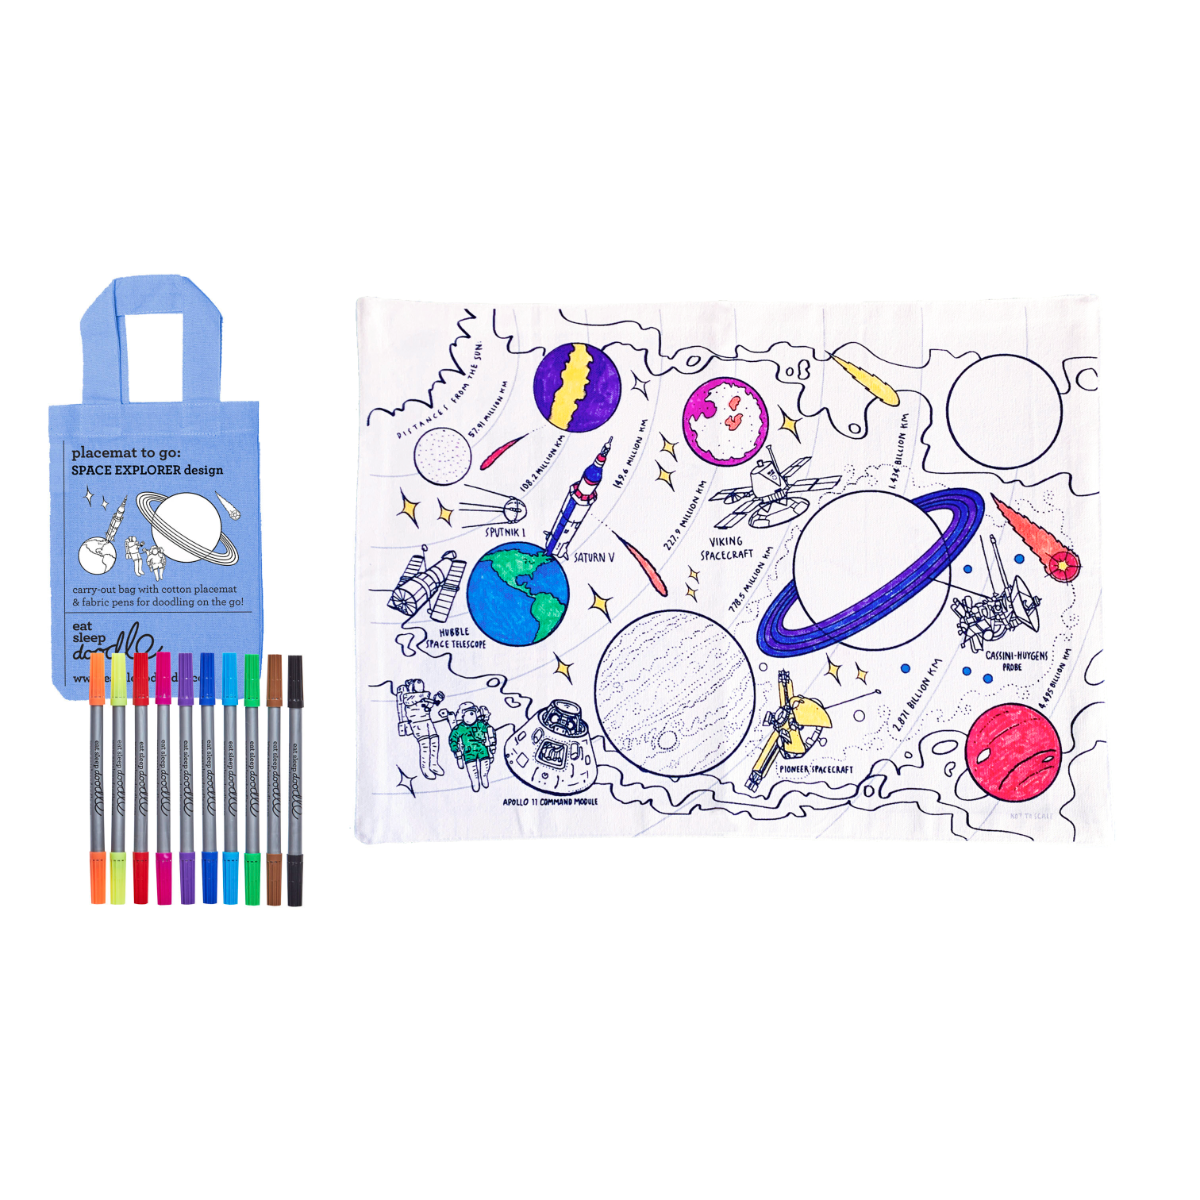 An image of Eat, Sleep, Doodle Space Explorer to go Placemat